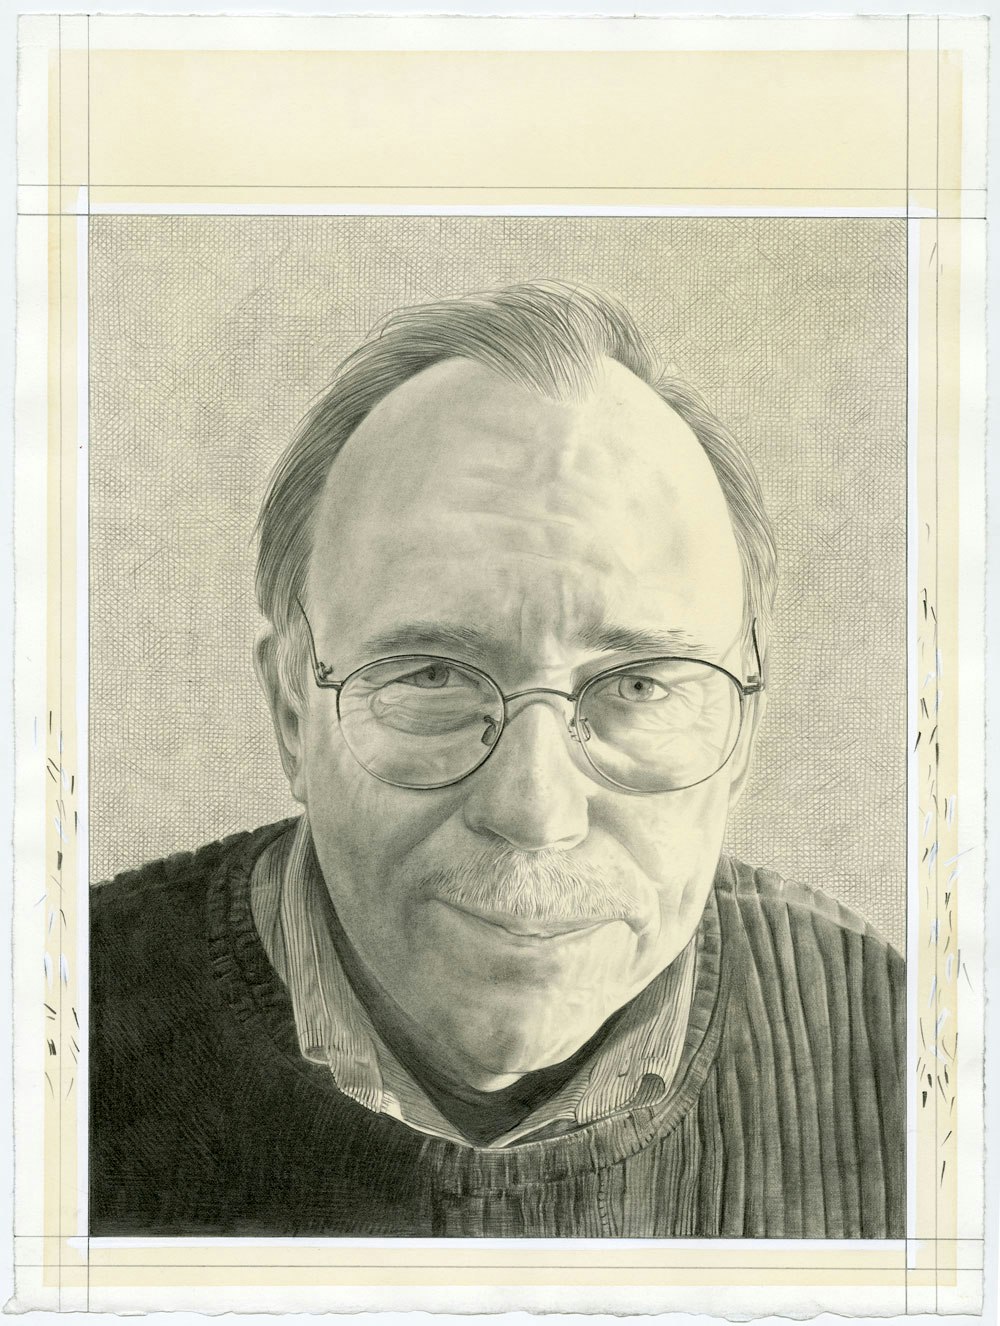 Portrait of Thomas Nozkowski, pencil on paper by Phong Bui.